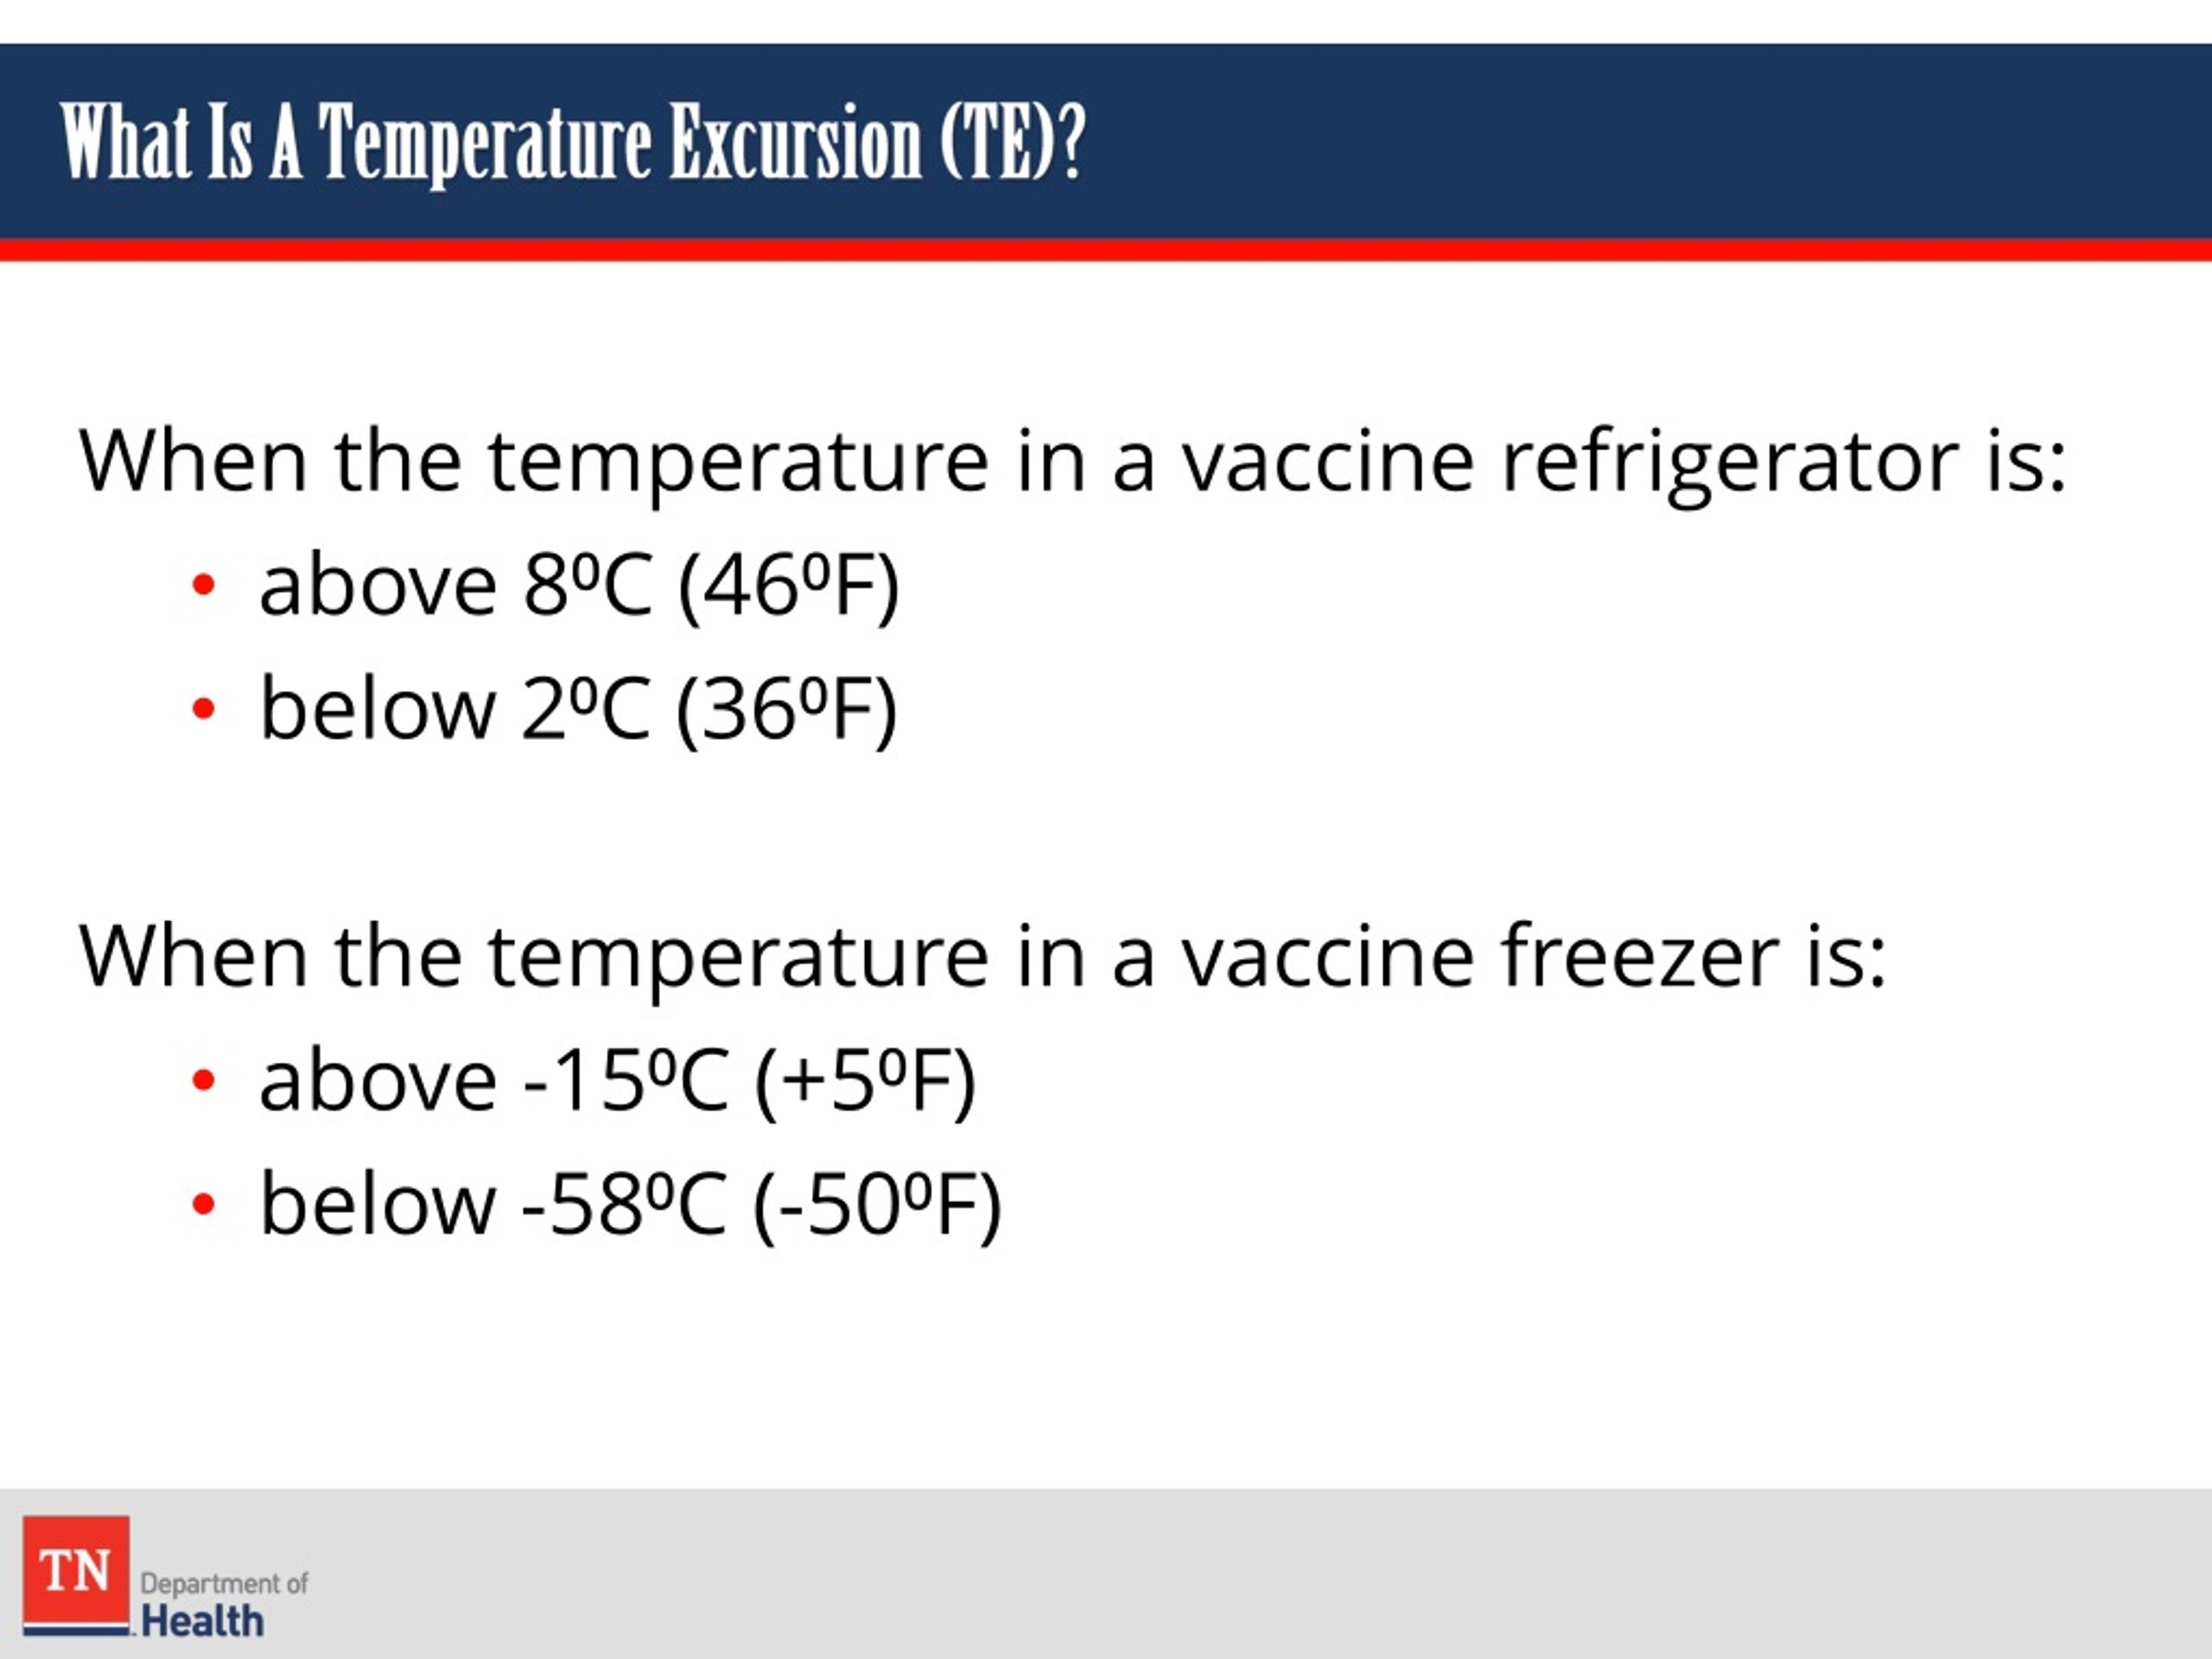 temperature excursion meaning in english